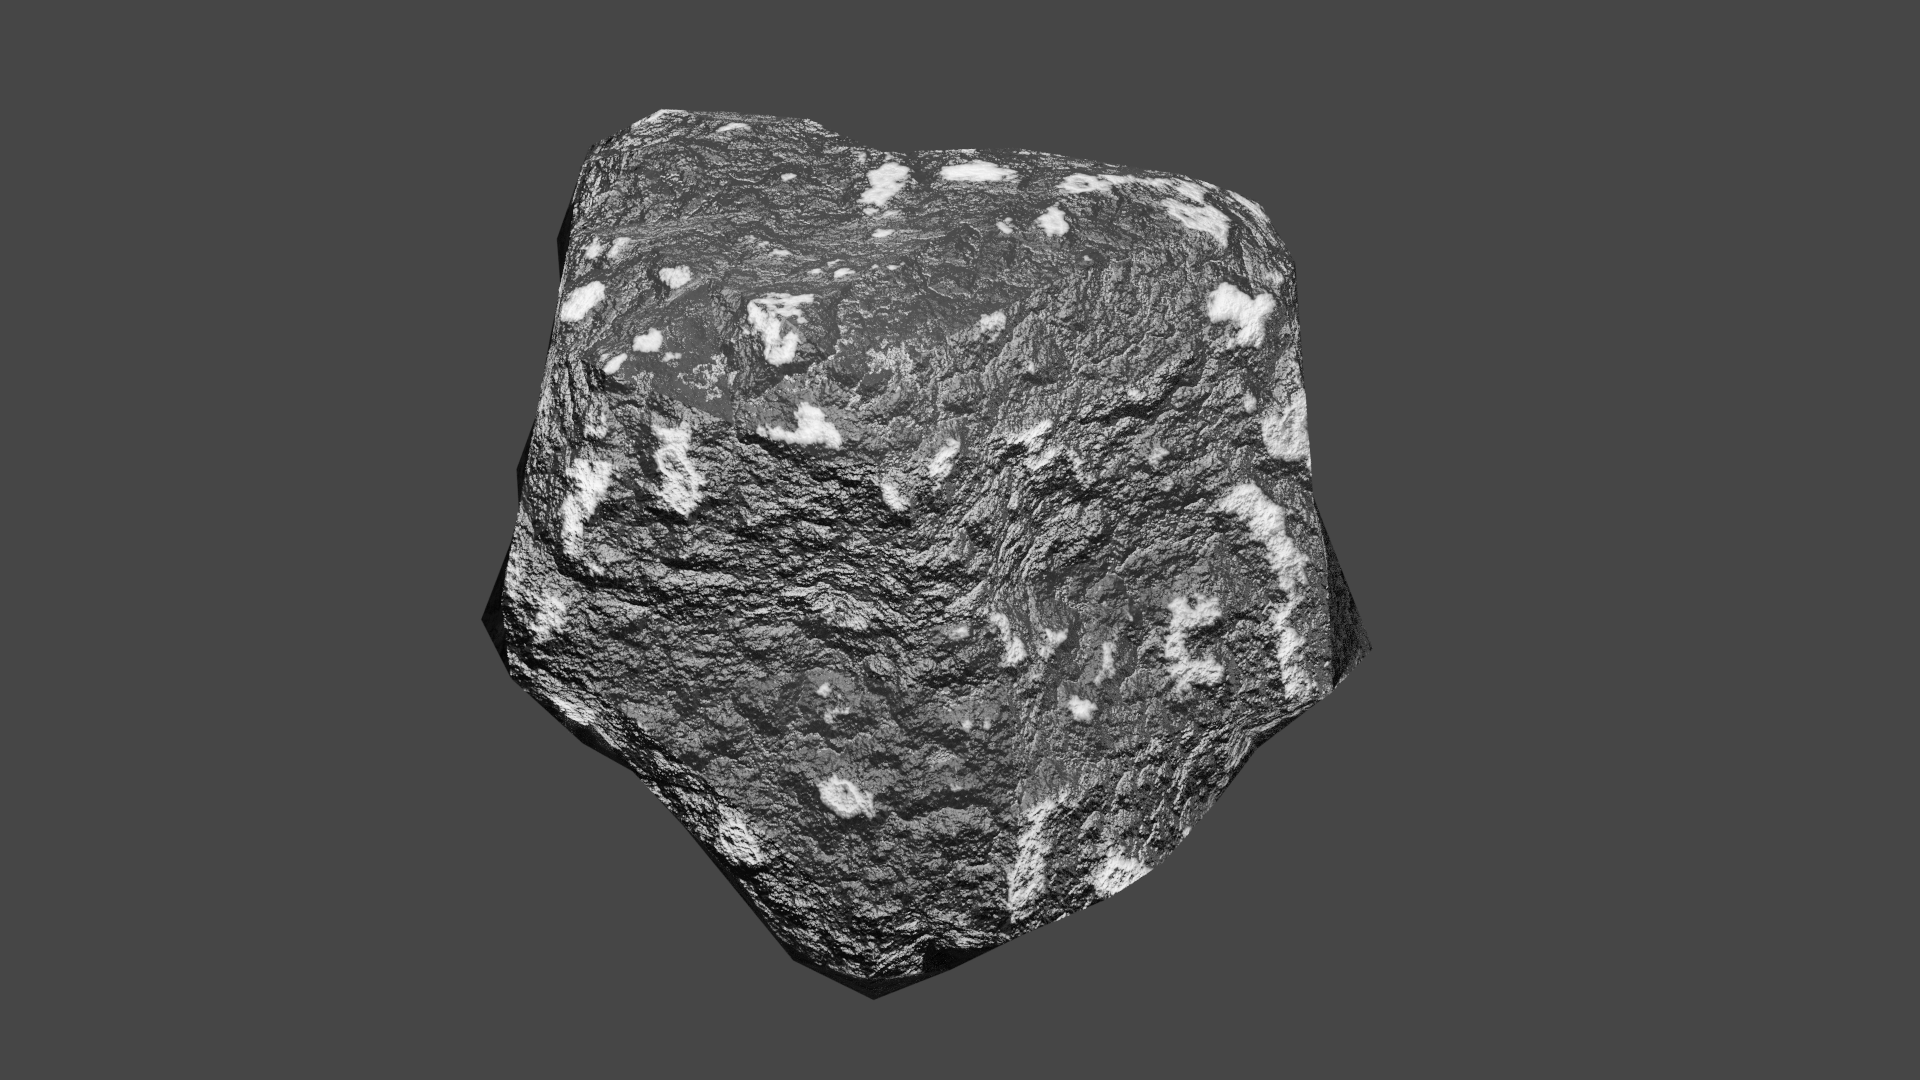  Rock created on Blender that was developed from visiting the Lake District and observing wet and dry rocks and rocks in the lake. 